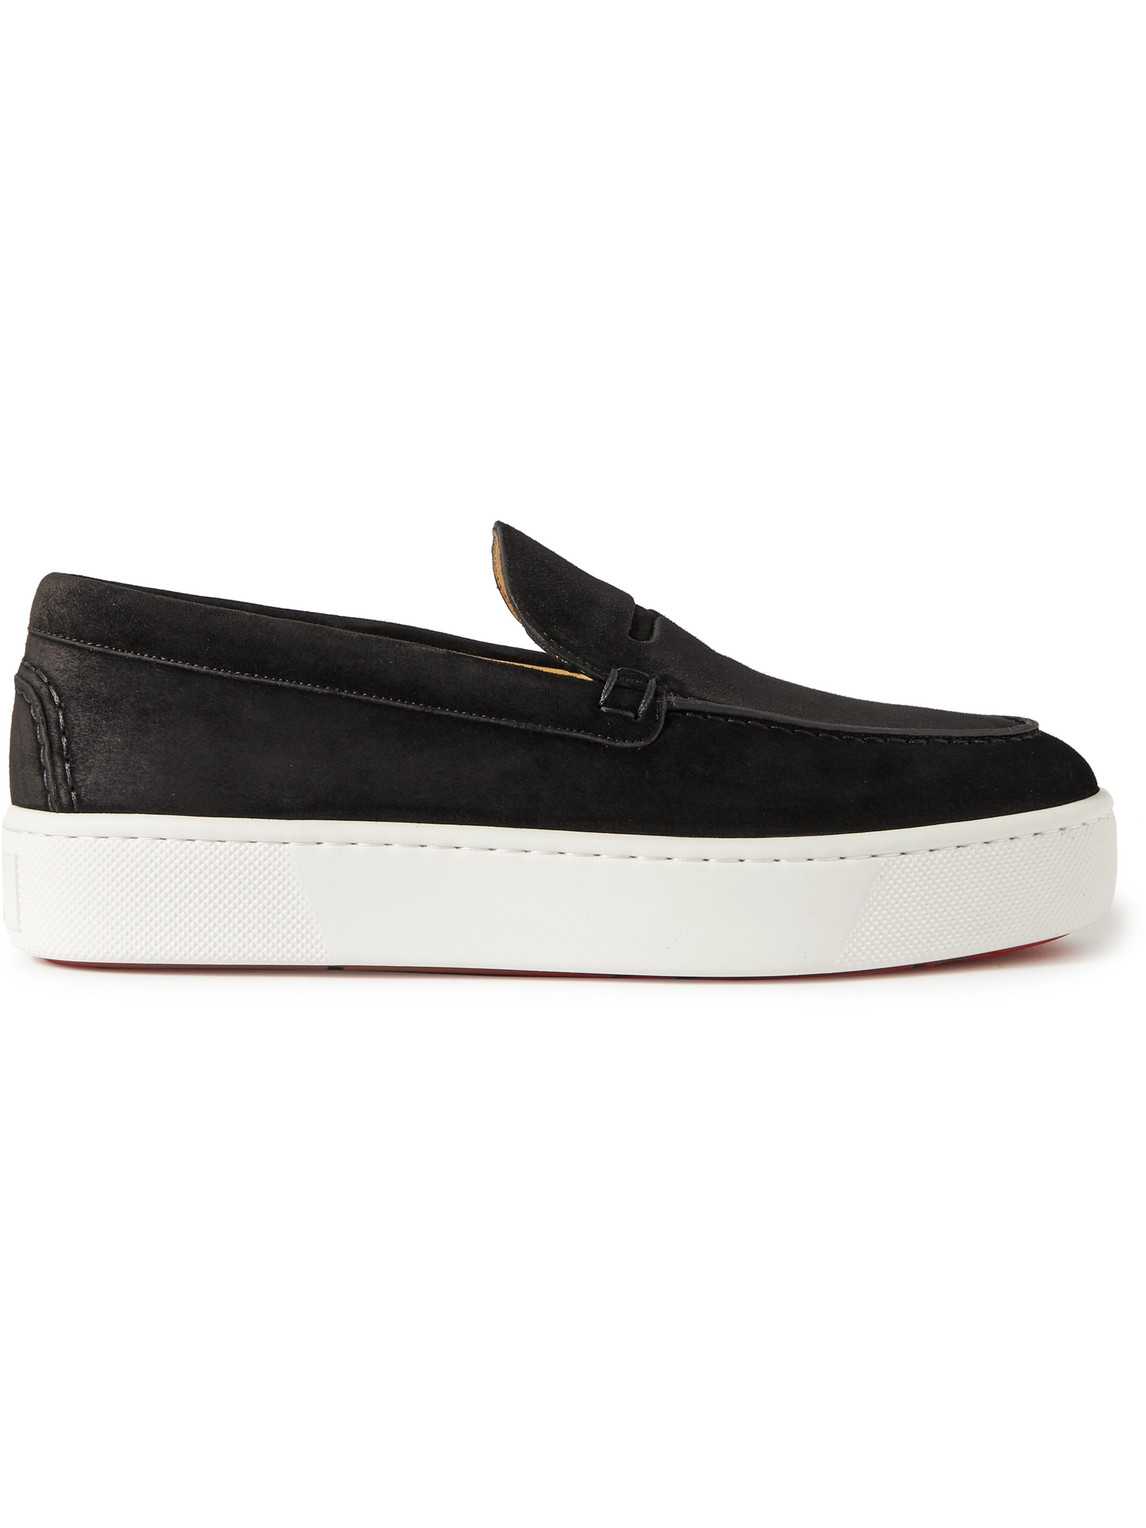 Christian Louboutin Paqueboat Suede Penny Loafers In Black